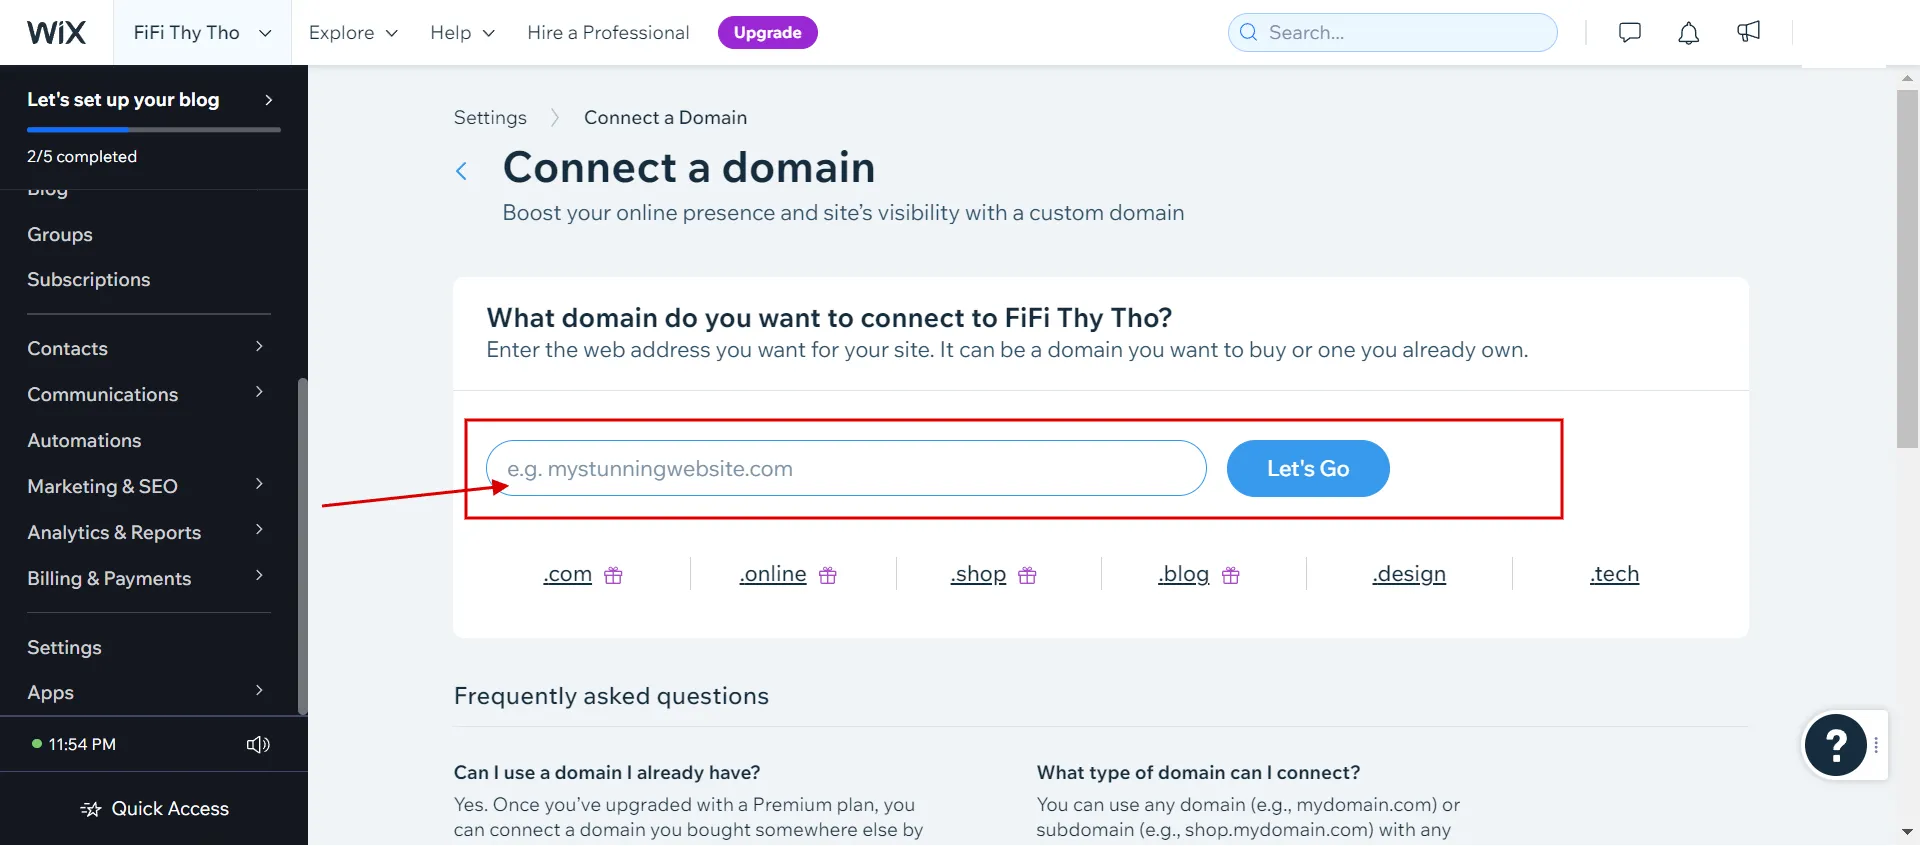 How to change domain on Wix